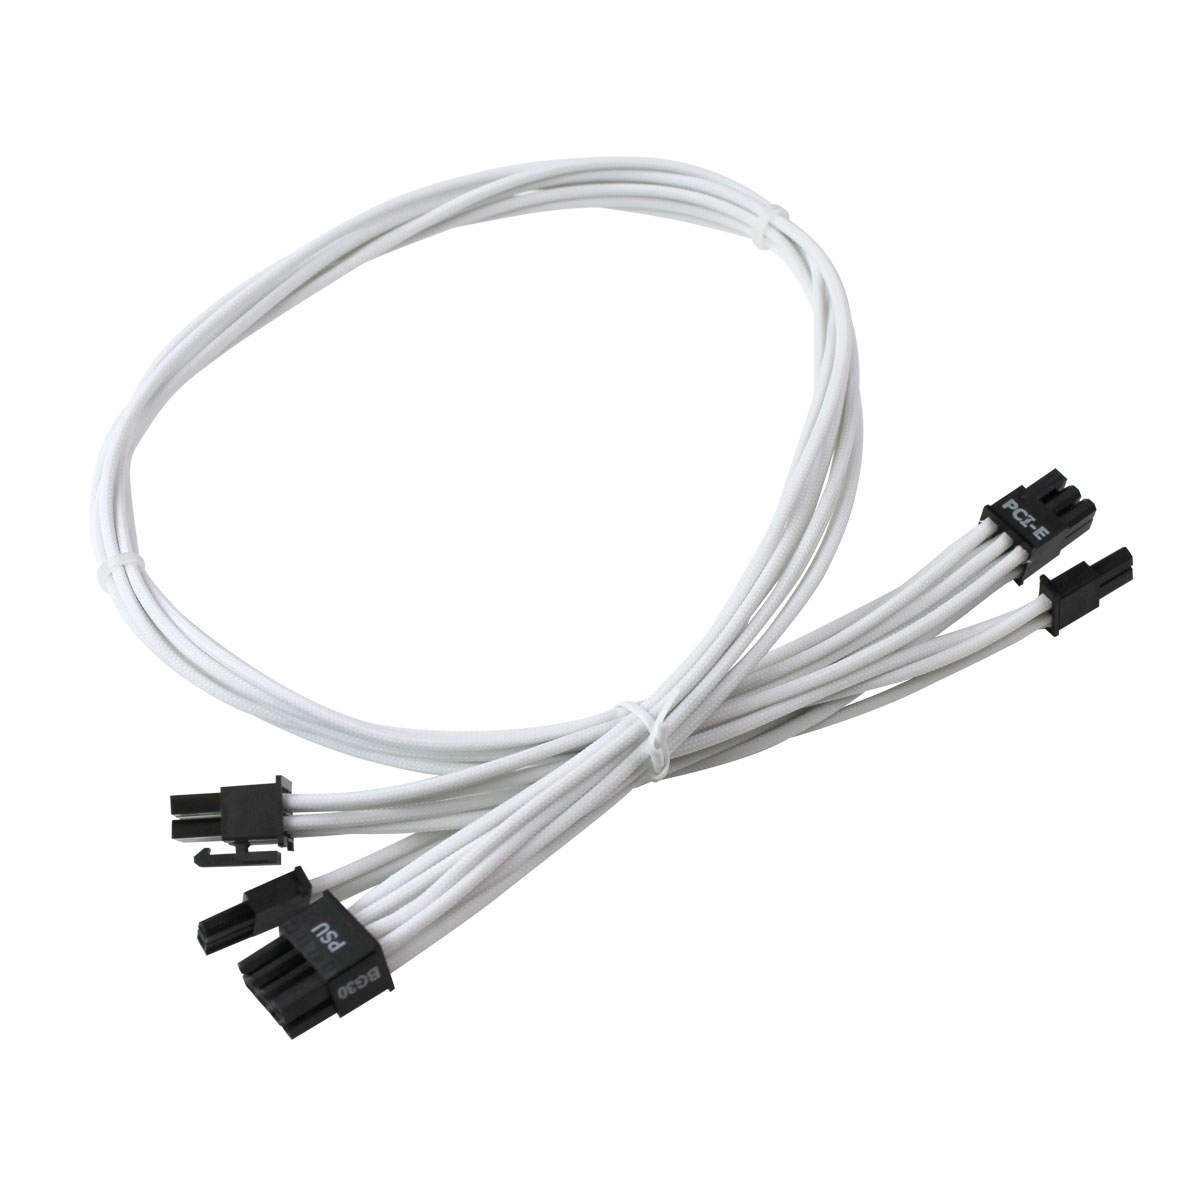 EVGA - JP - 製品 - GS (550/650) White Power Supply Cable Set